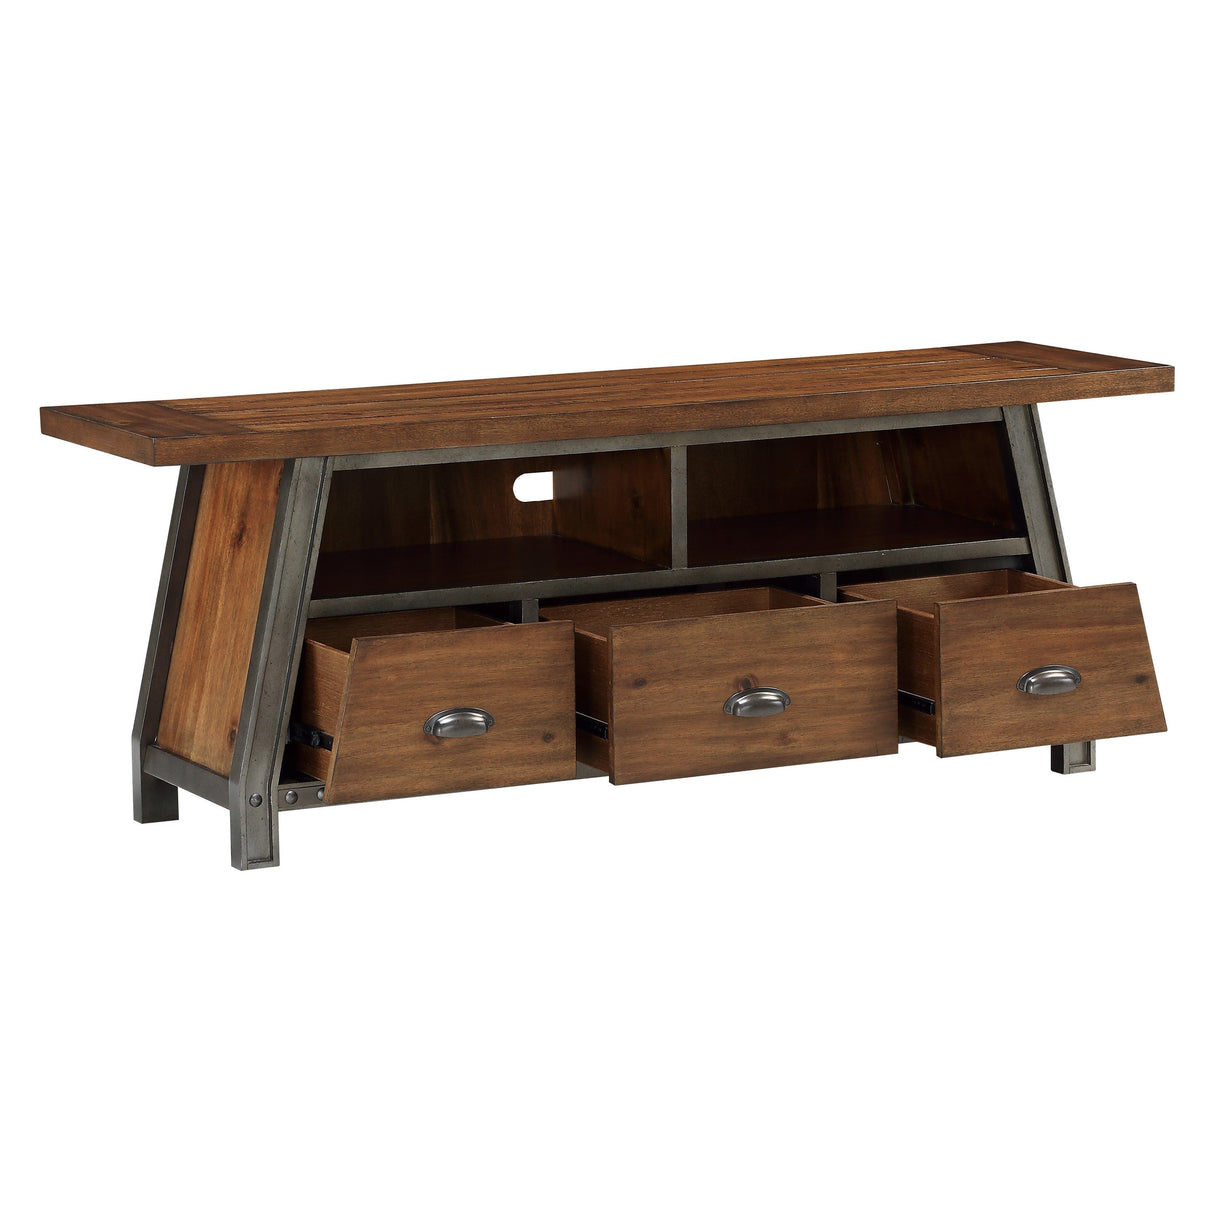 Holverson Rustic Brown TV Stand